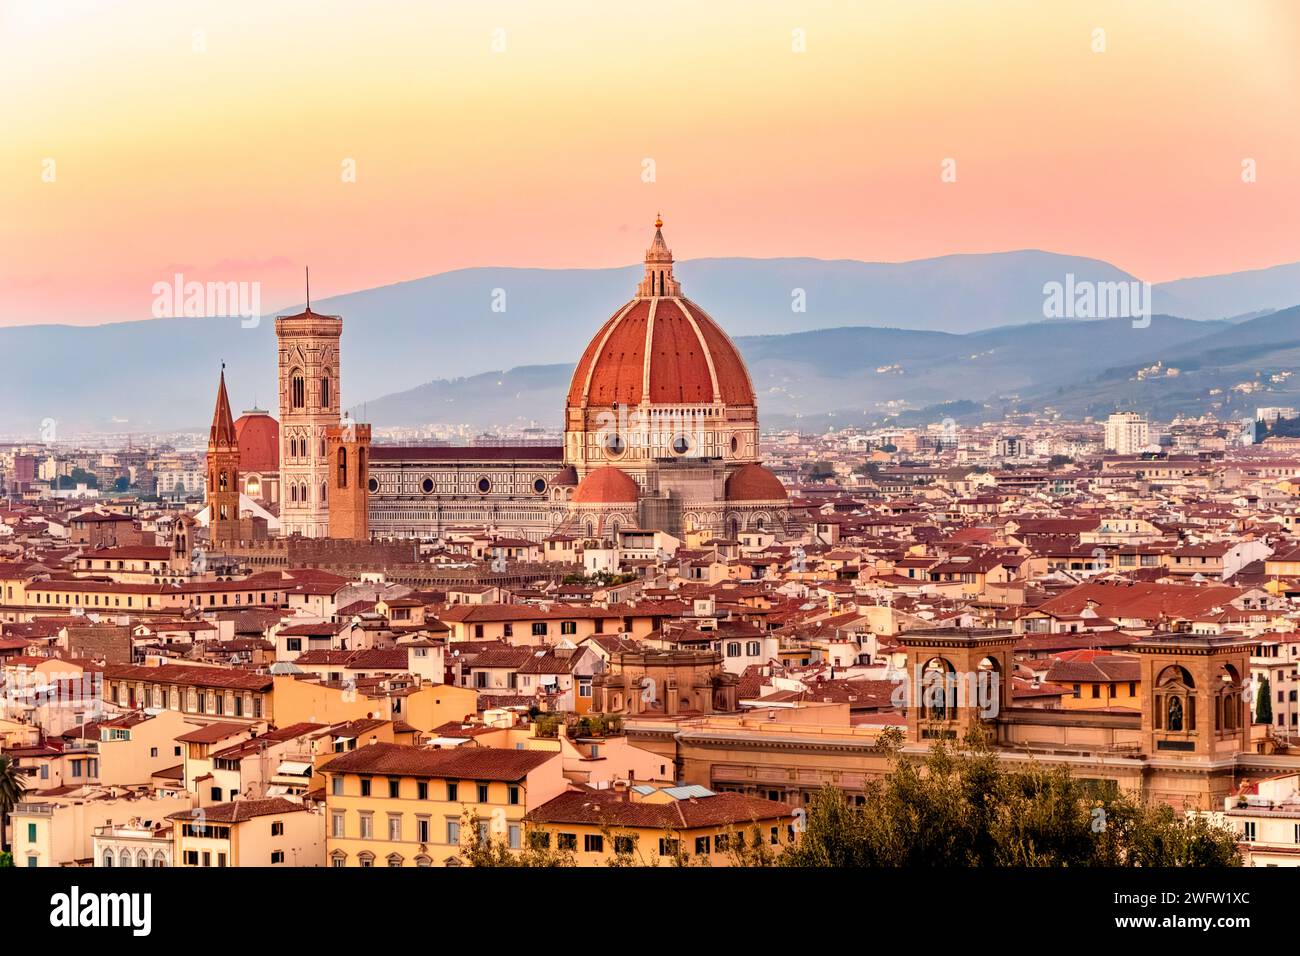 The Duomo in Florence at sunset ,with the striking Dome built by Filippo Brunelleschi ,Florence, Italy Stock Photo